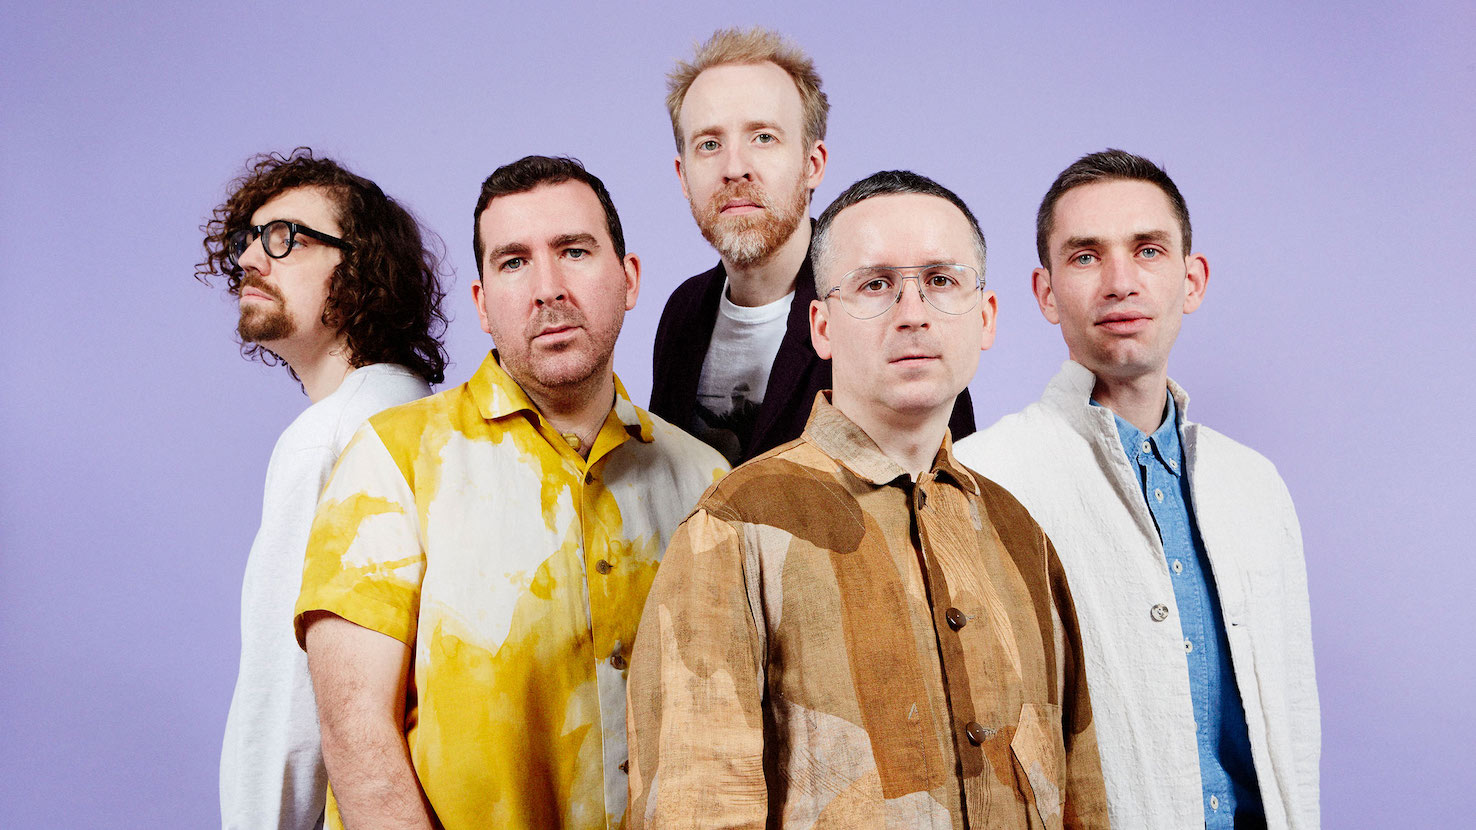 Hot Chip's – A Bath Full of Ecstasy Tour is coming to Australia!